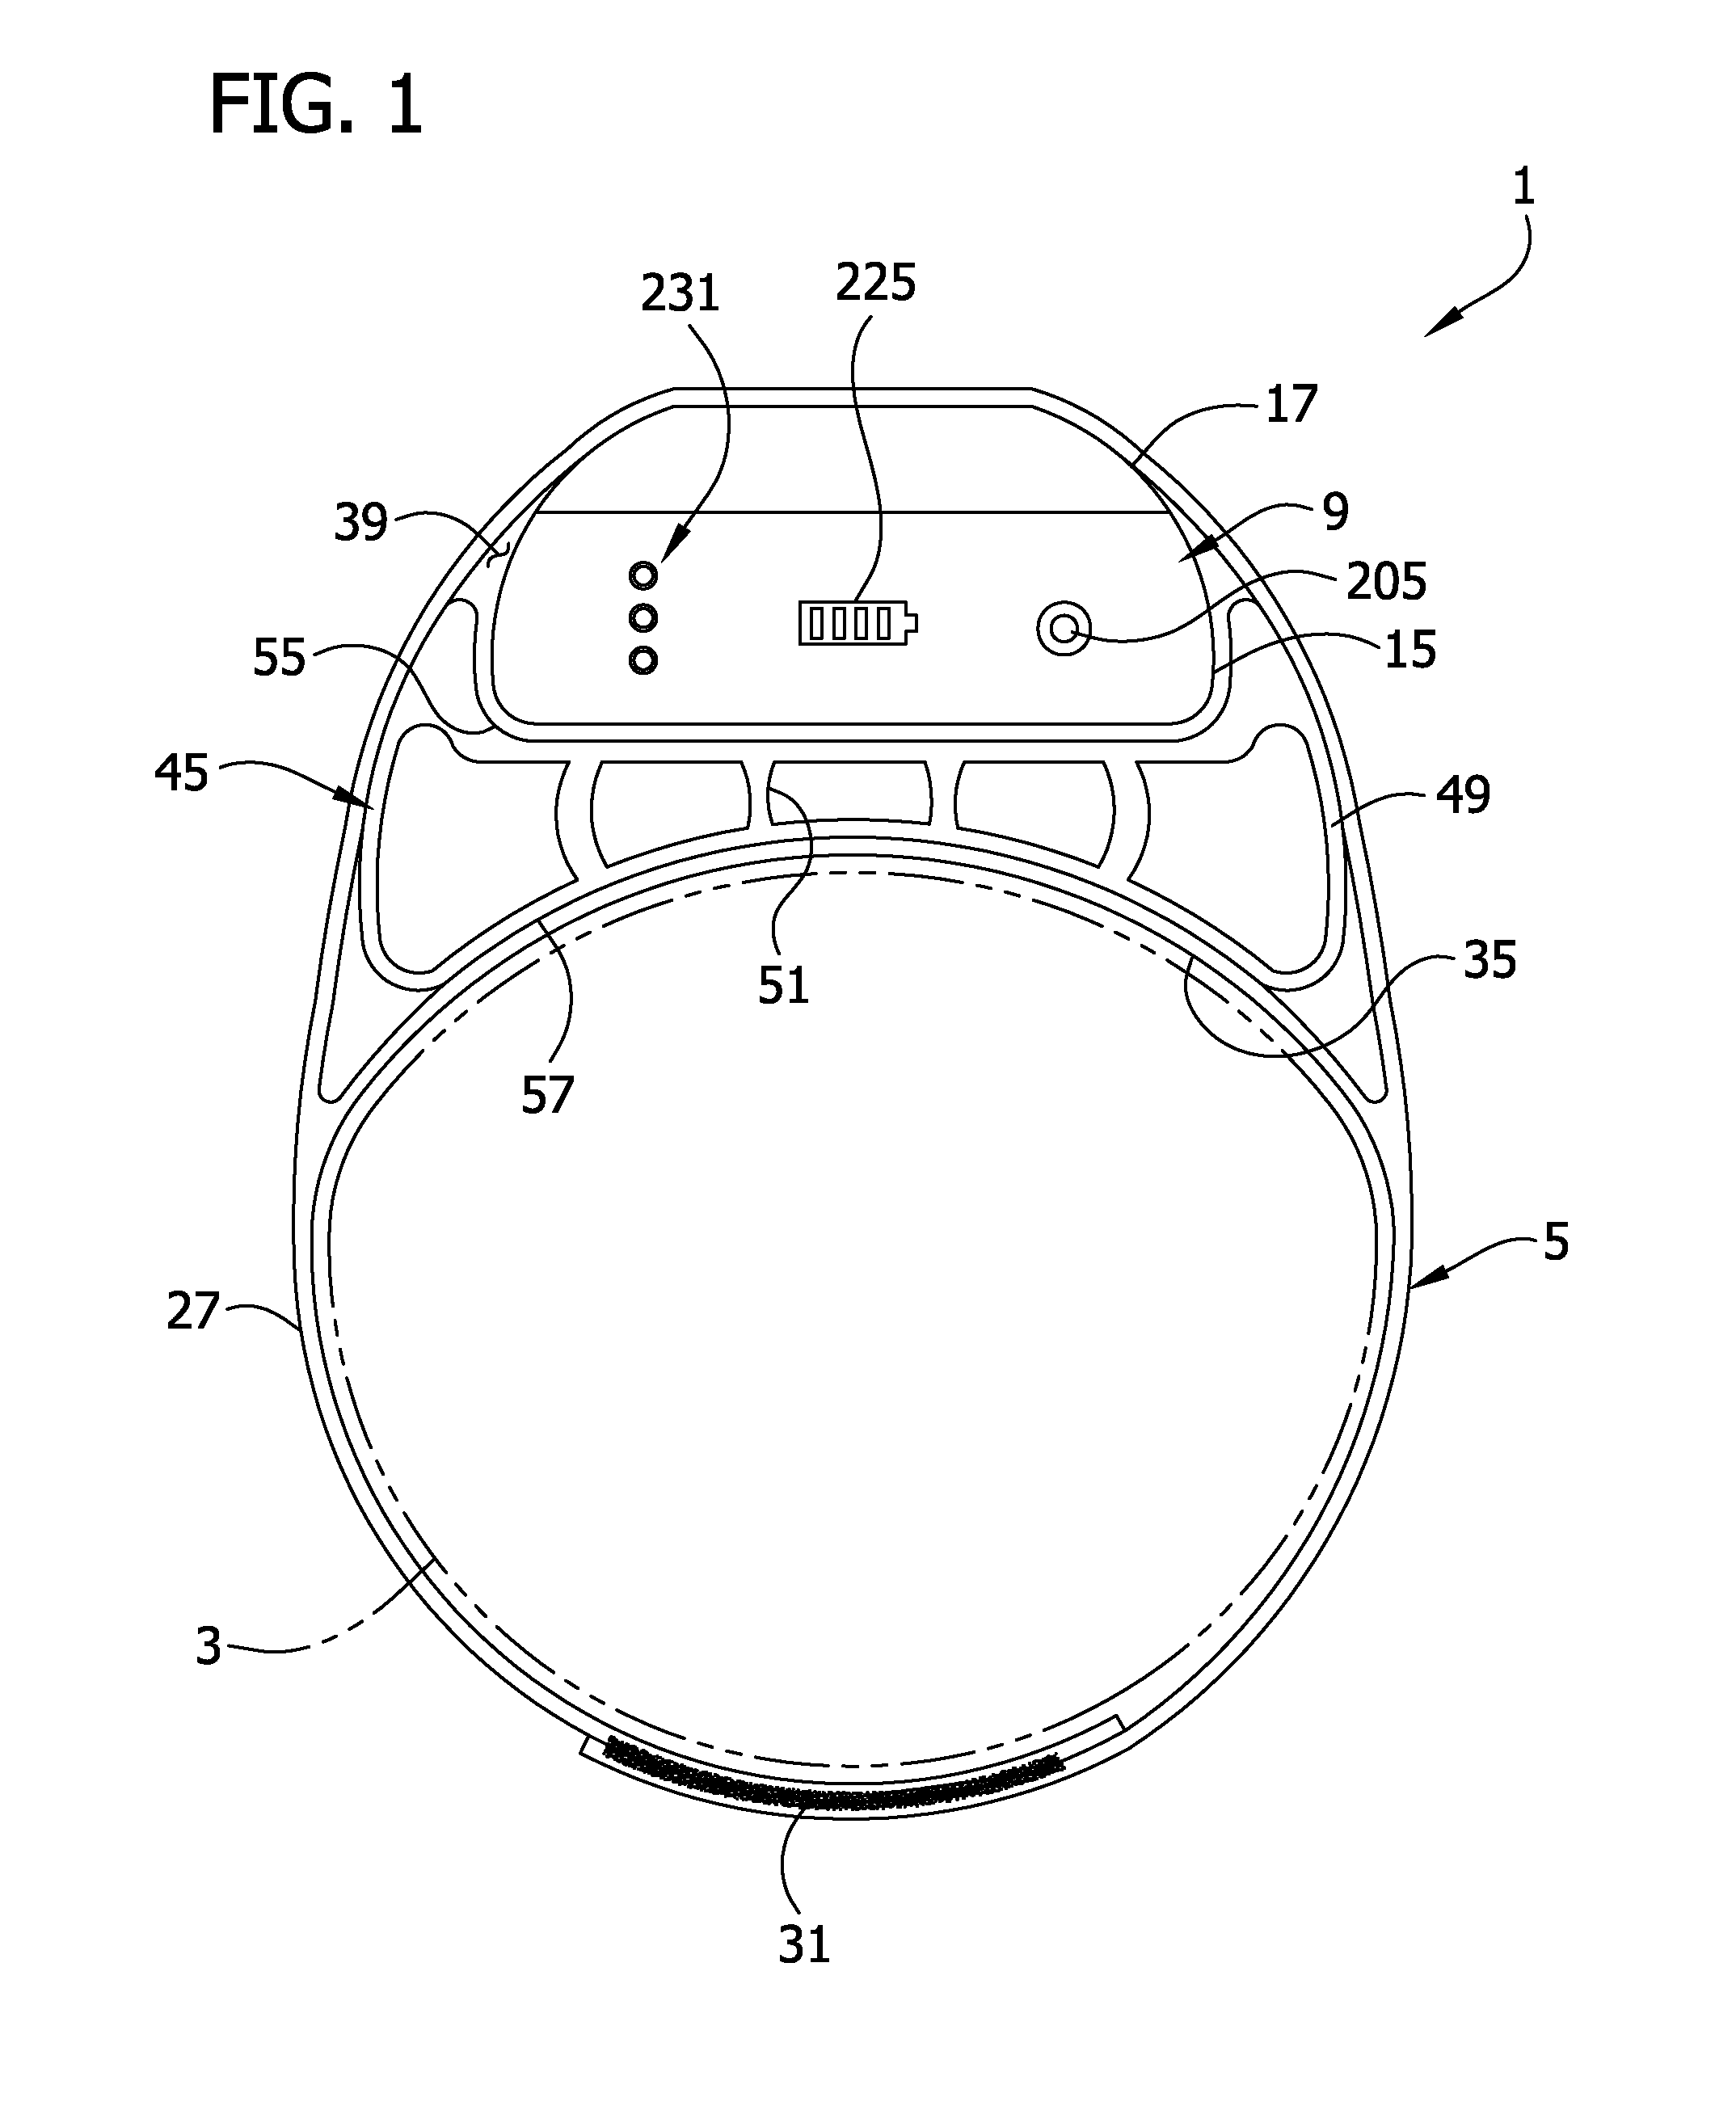 Disposable band for a compression device